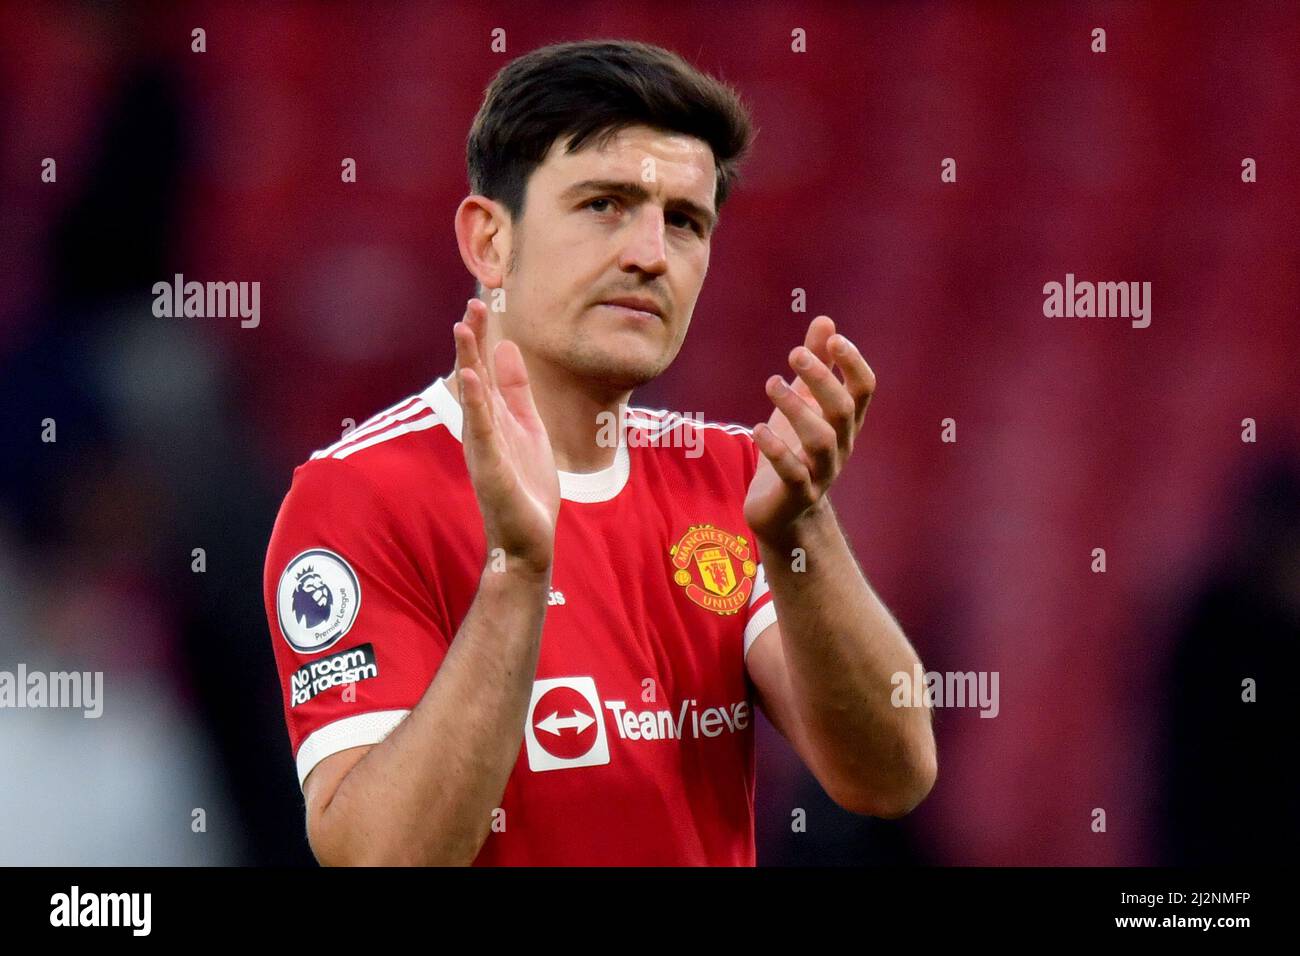 Manchester United's Harry Maguire applauds the fans after the final whistle during the Premier League match at Old Trafford, Greater Manchester, UK. Picture date: Saturday April 2, 2022. Photo credit should read: Anthony Devlin Stock Photo